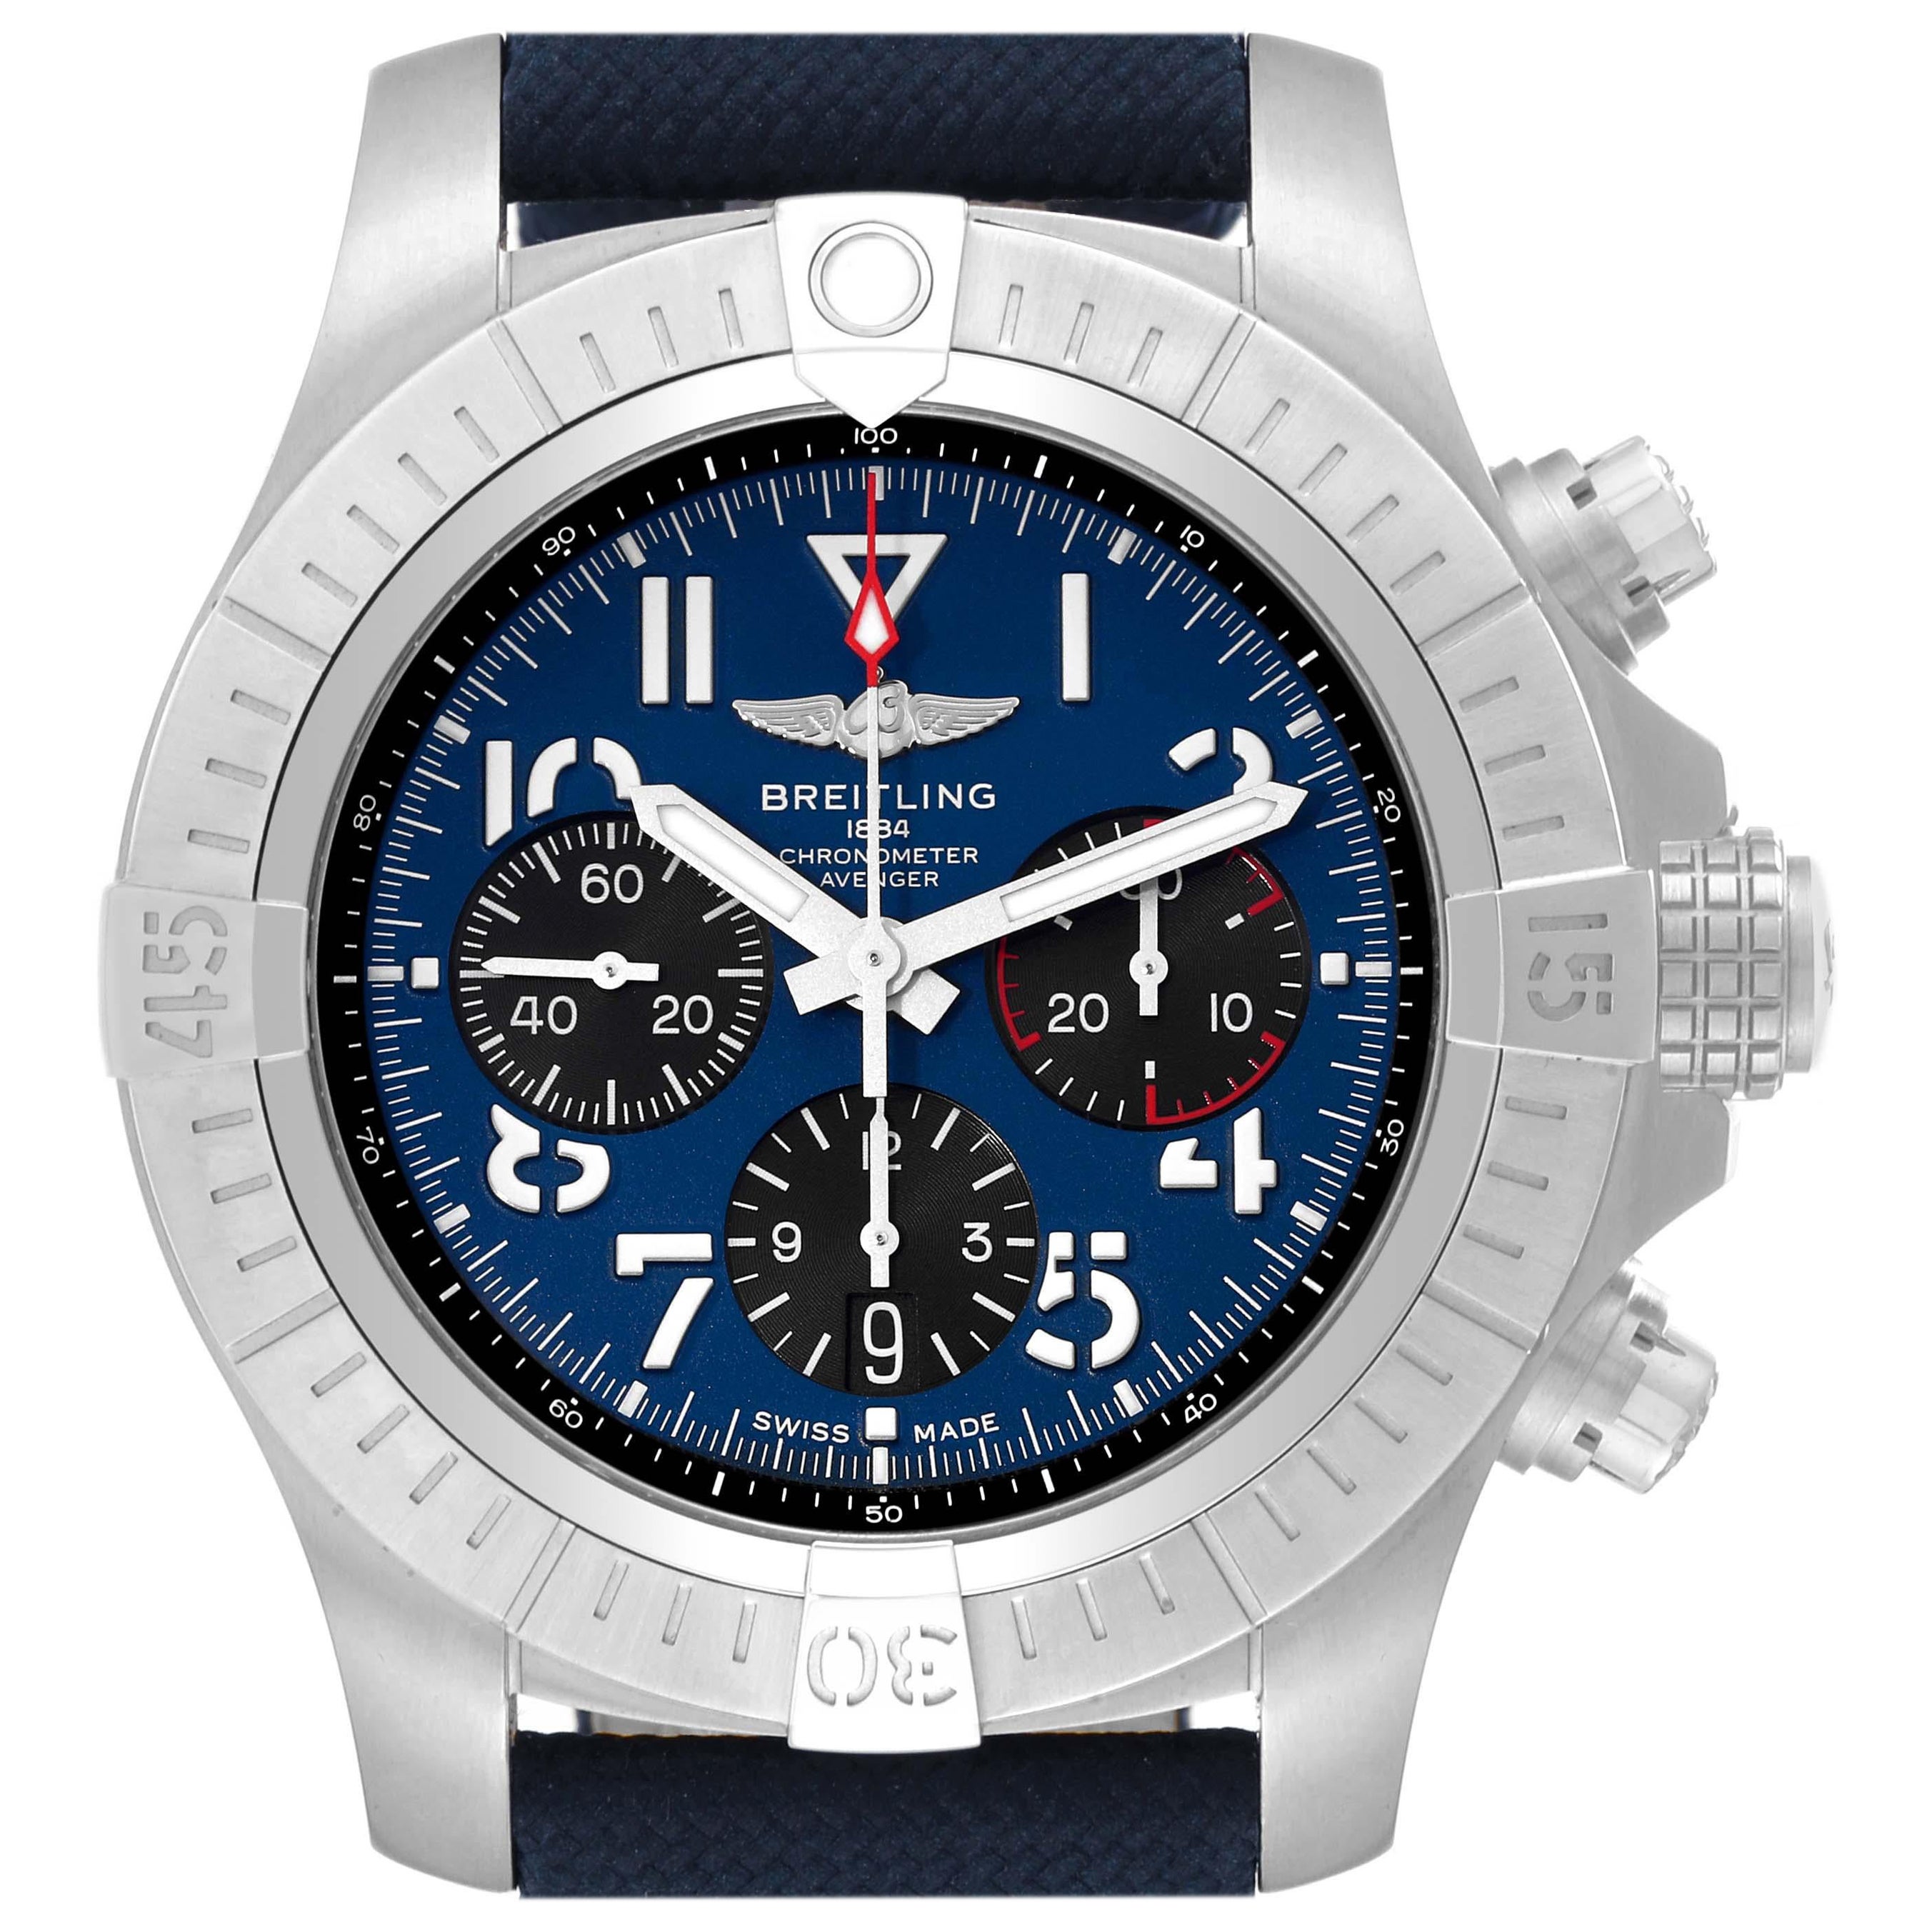 Breitling Avenger B01 Chronograph 45 Steel Mens Watch AB0182 Box Card For Sale